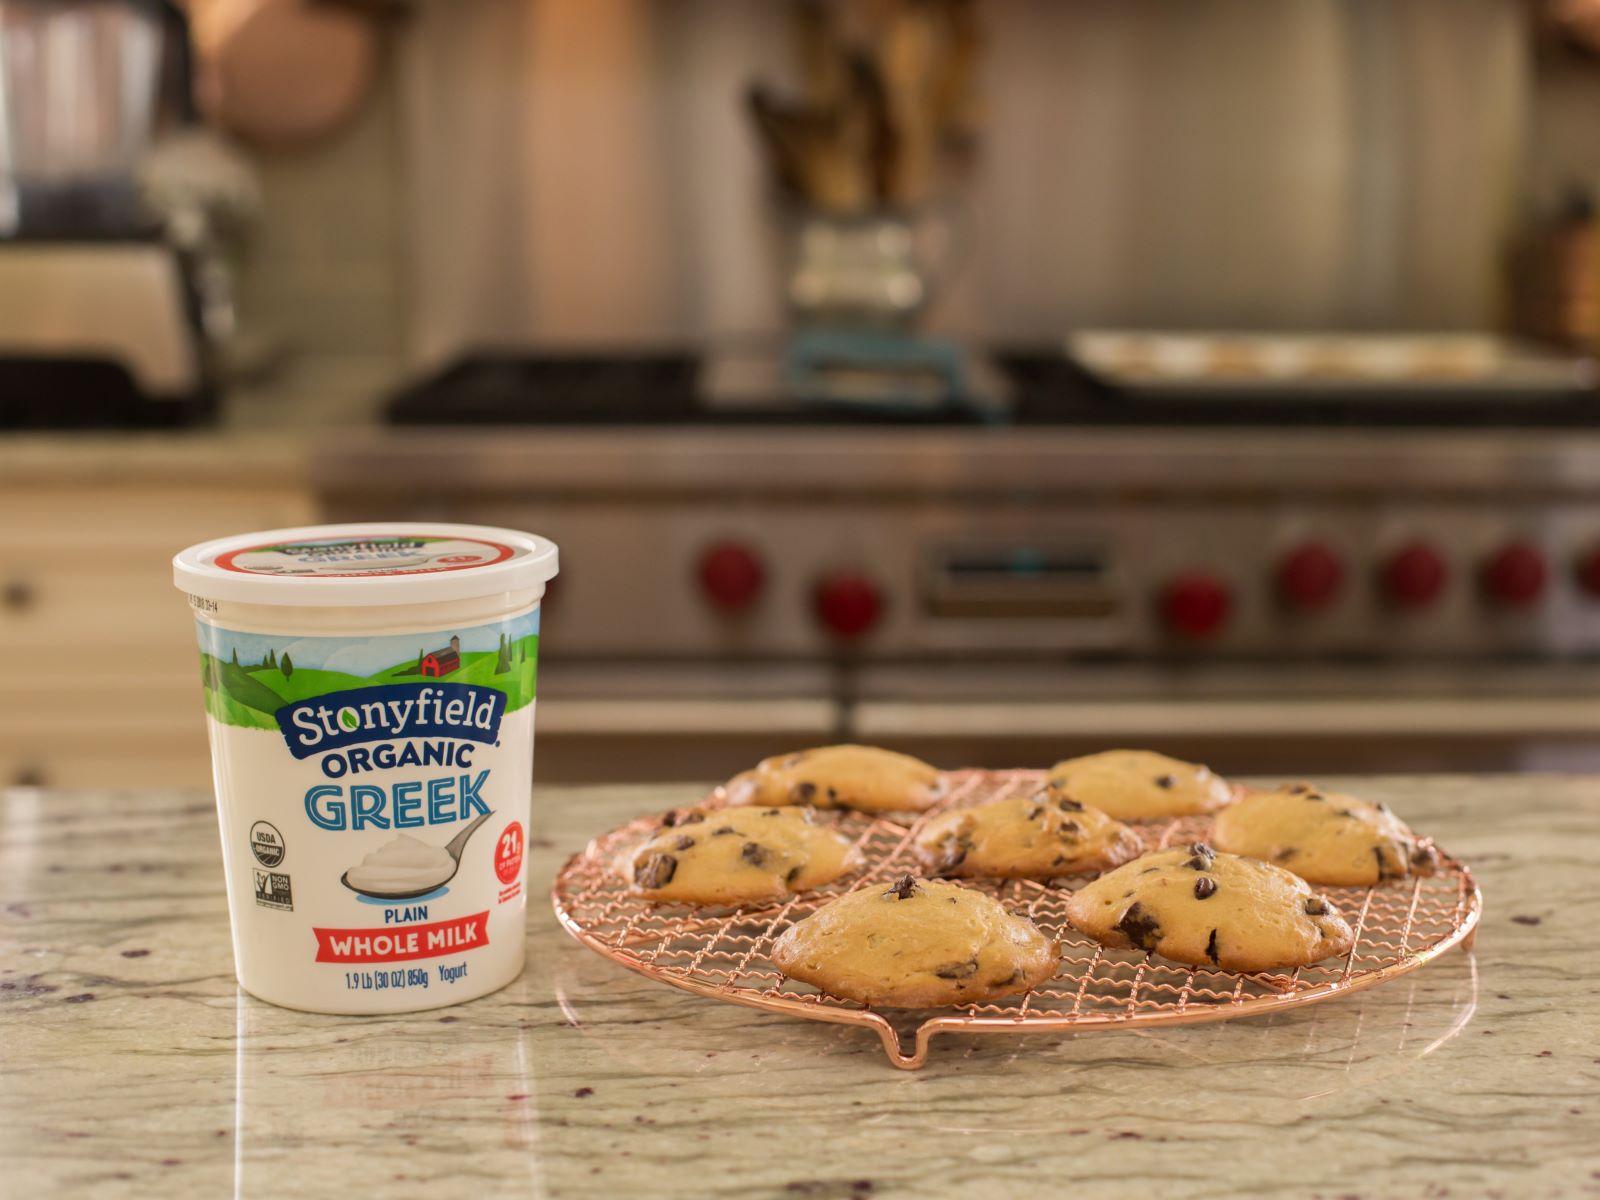 New Flavors Of Greek Yogurt From Stonyfield: A Delicious And Healthy Option